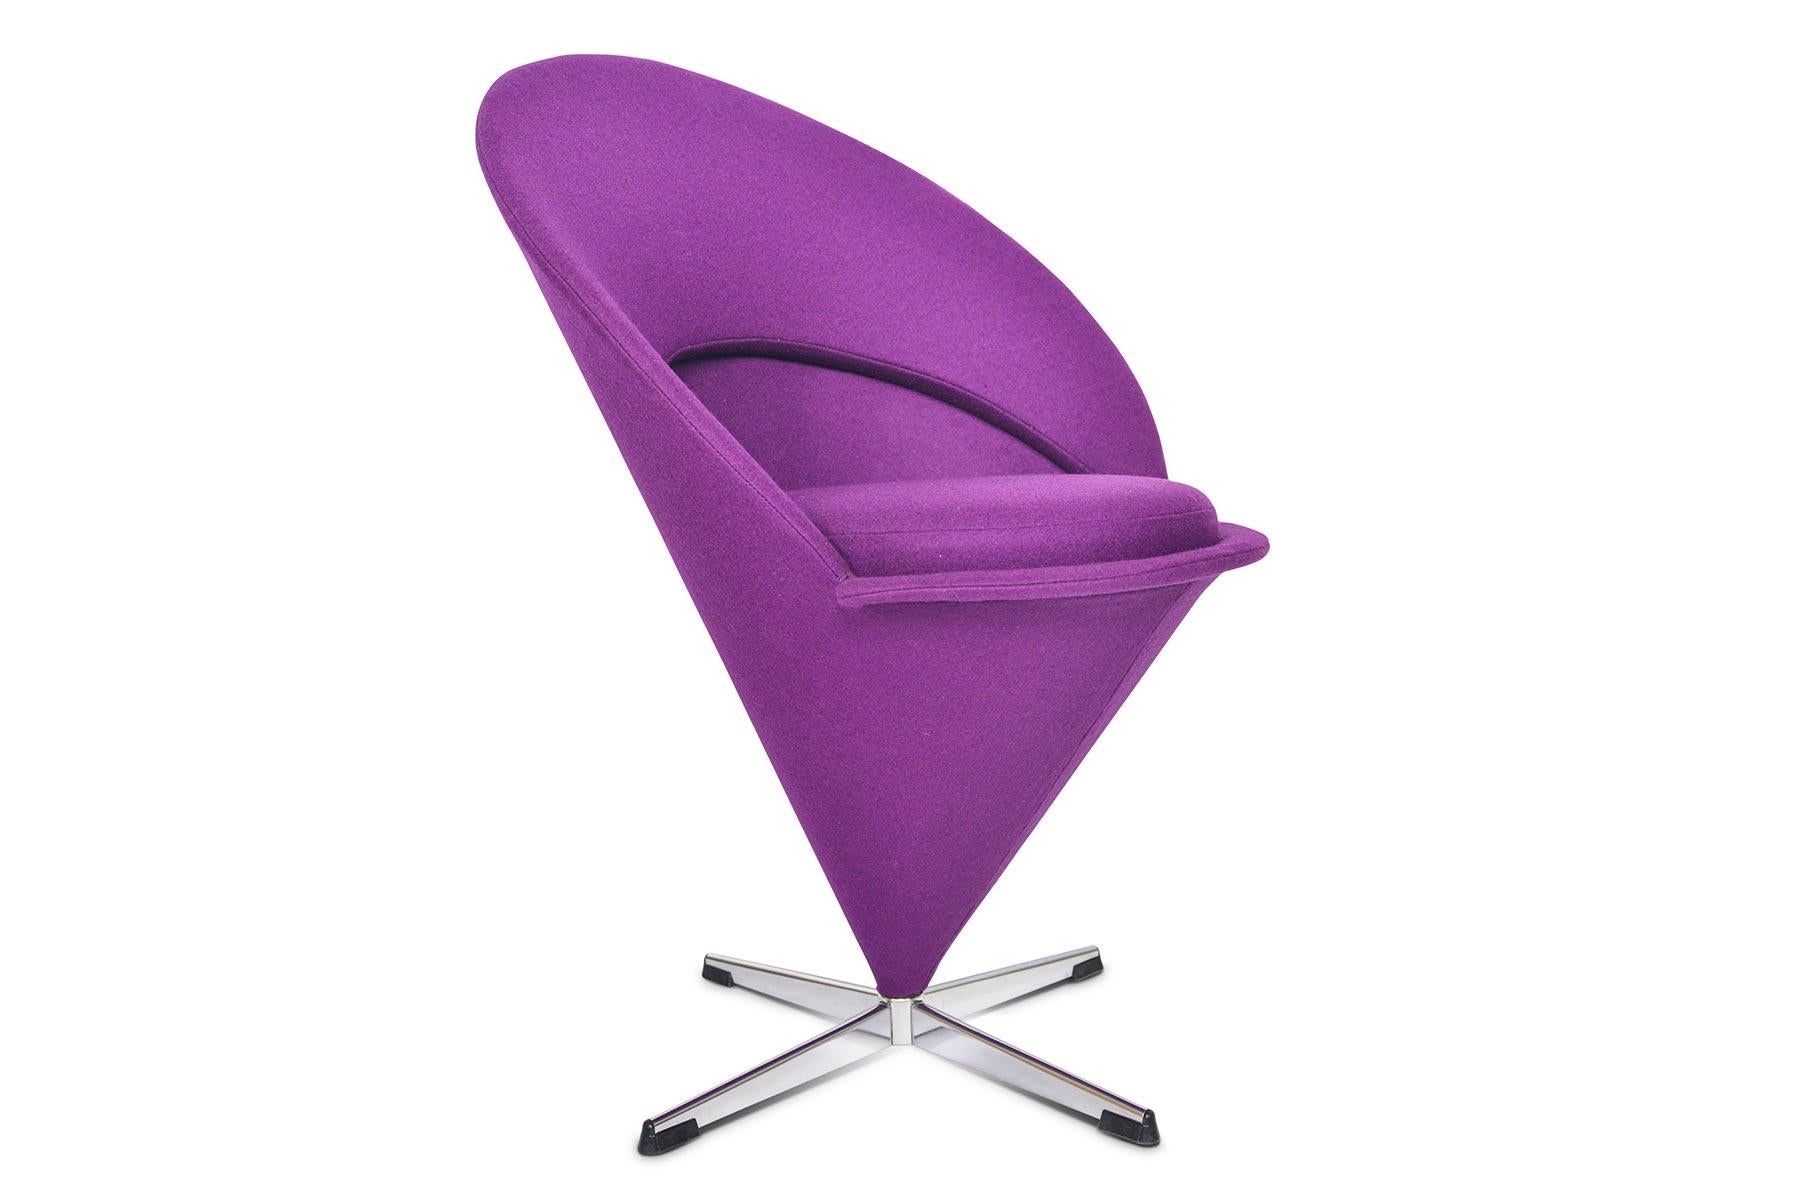 Fully restored in to its original glory, this cone chair by Verner Panton has been newly recovered in provocative purple felted wool by Kvadrat. The bold design offers a padded backrest and removable seat bottom. The swivel base offers 360° of